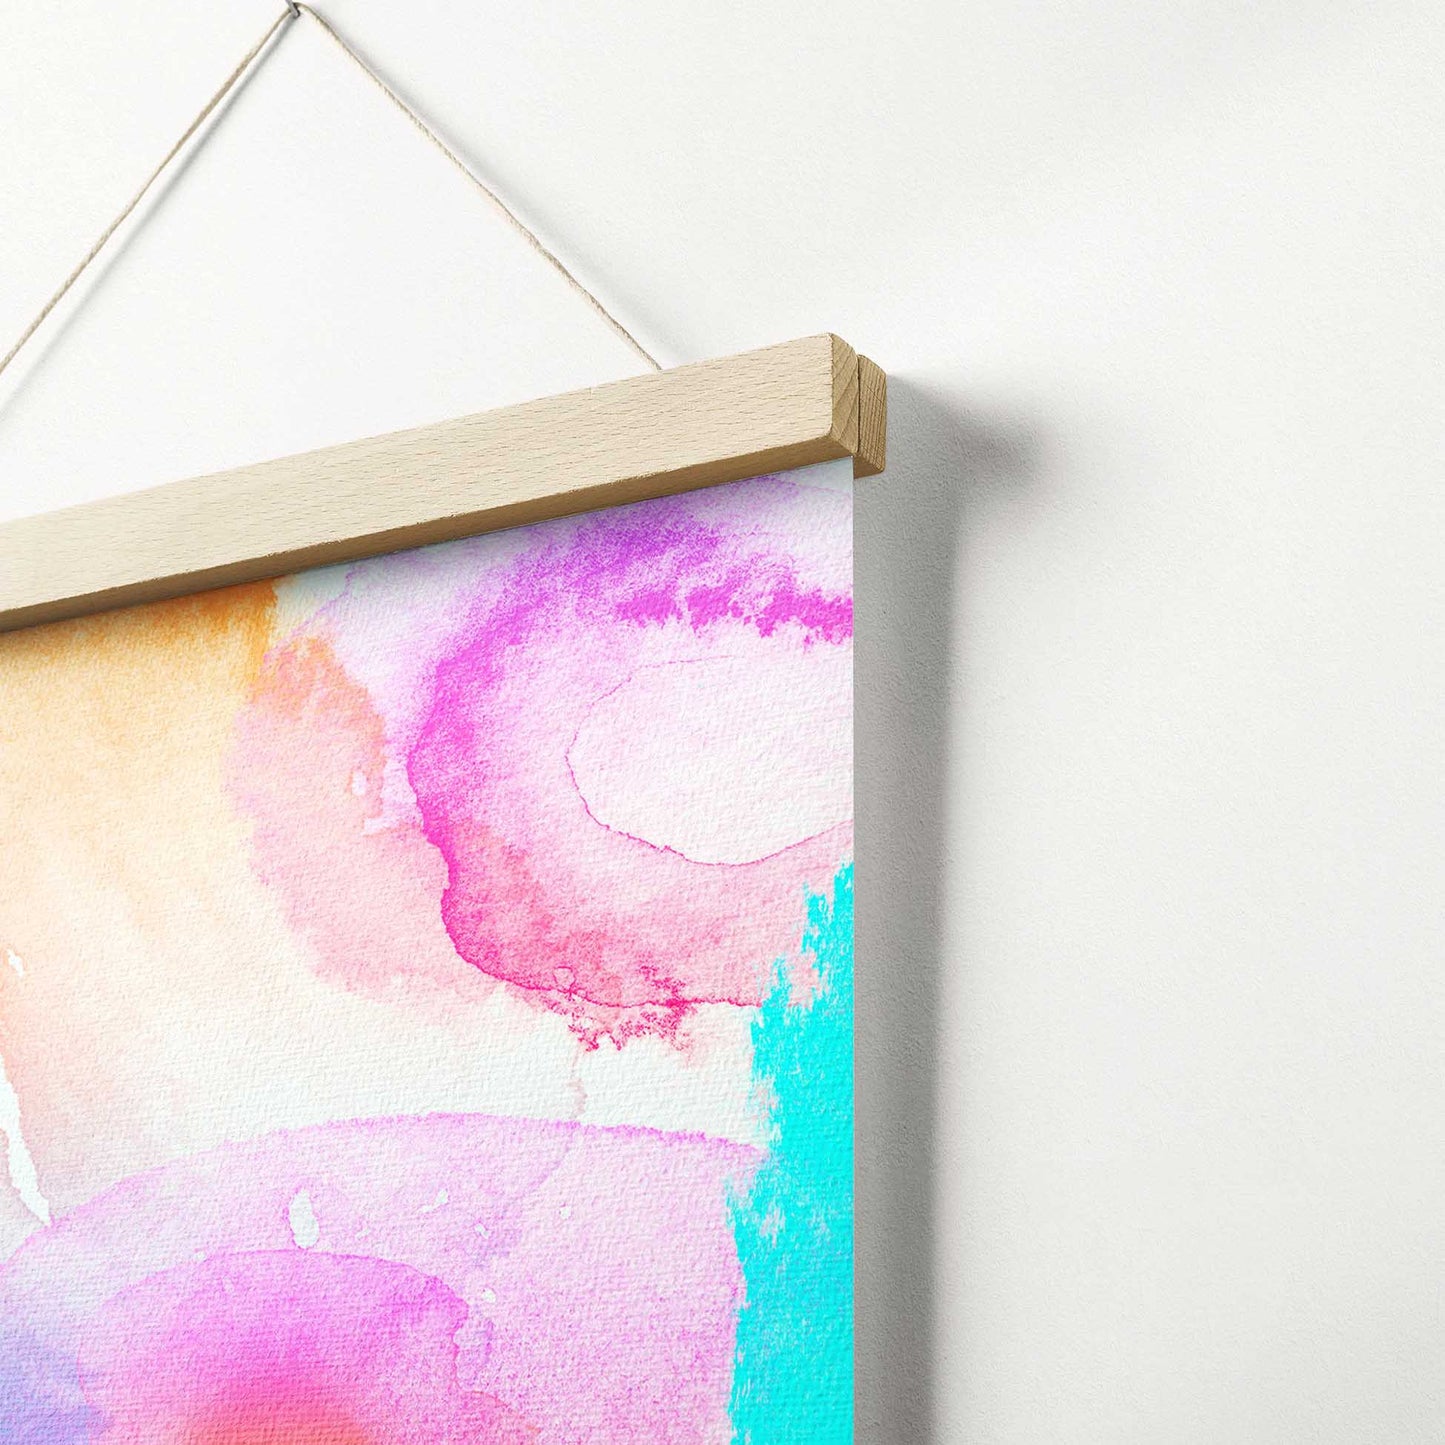 Unleash your creativity with our Personalised Acid Colours Poster Hanger. The yellow, green, and teal prints exude coolness, while the playful textures add a fun and energetic vibe. Crafted on gallery-quality paper and framed 